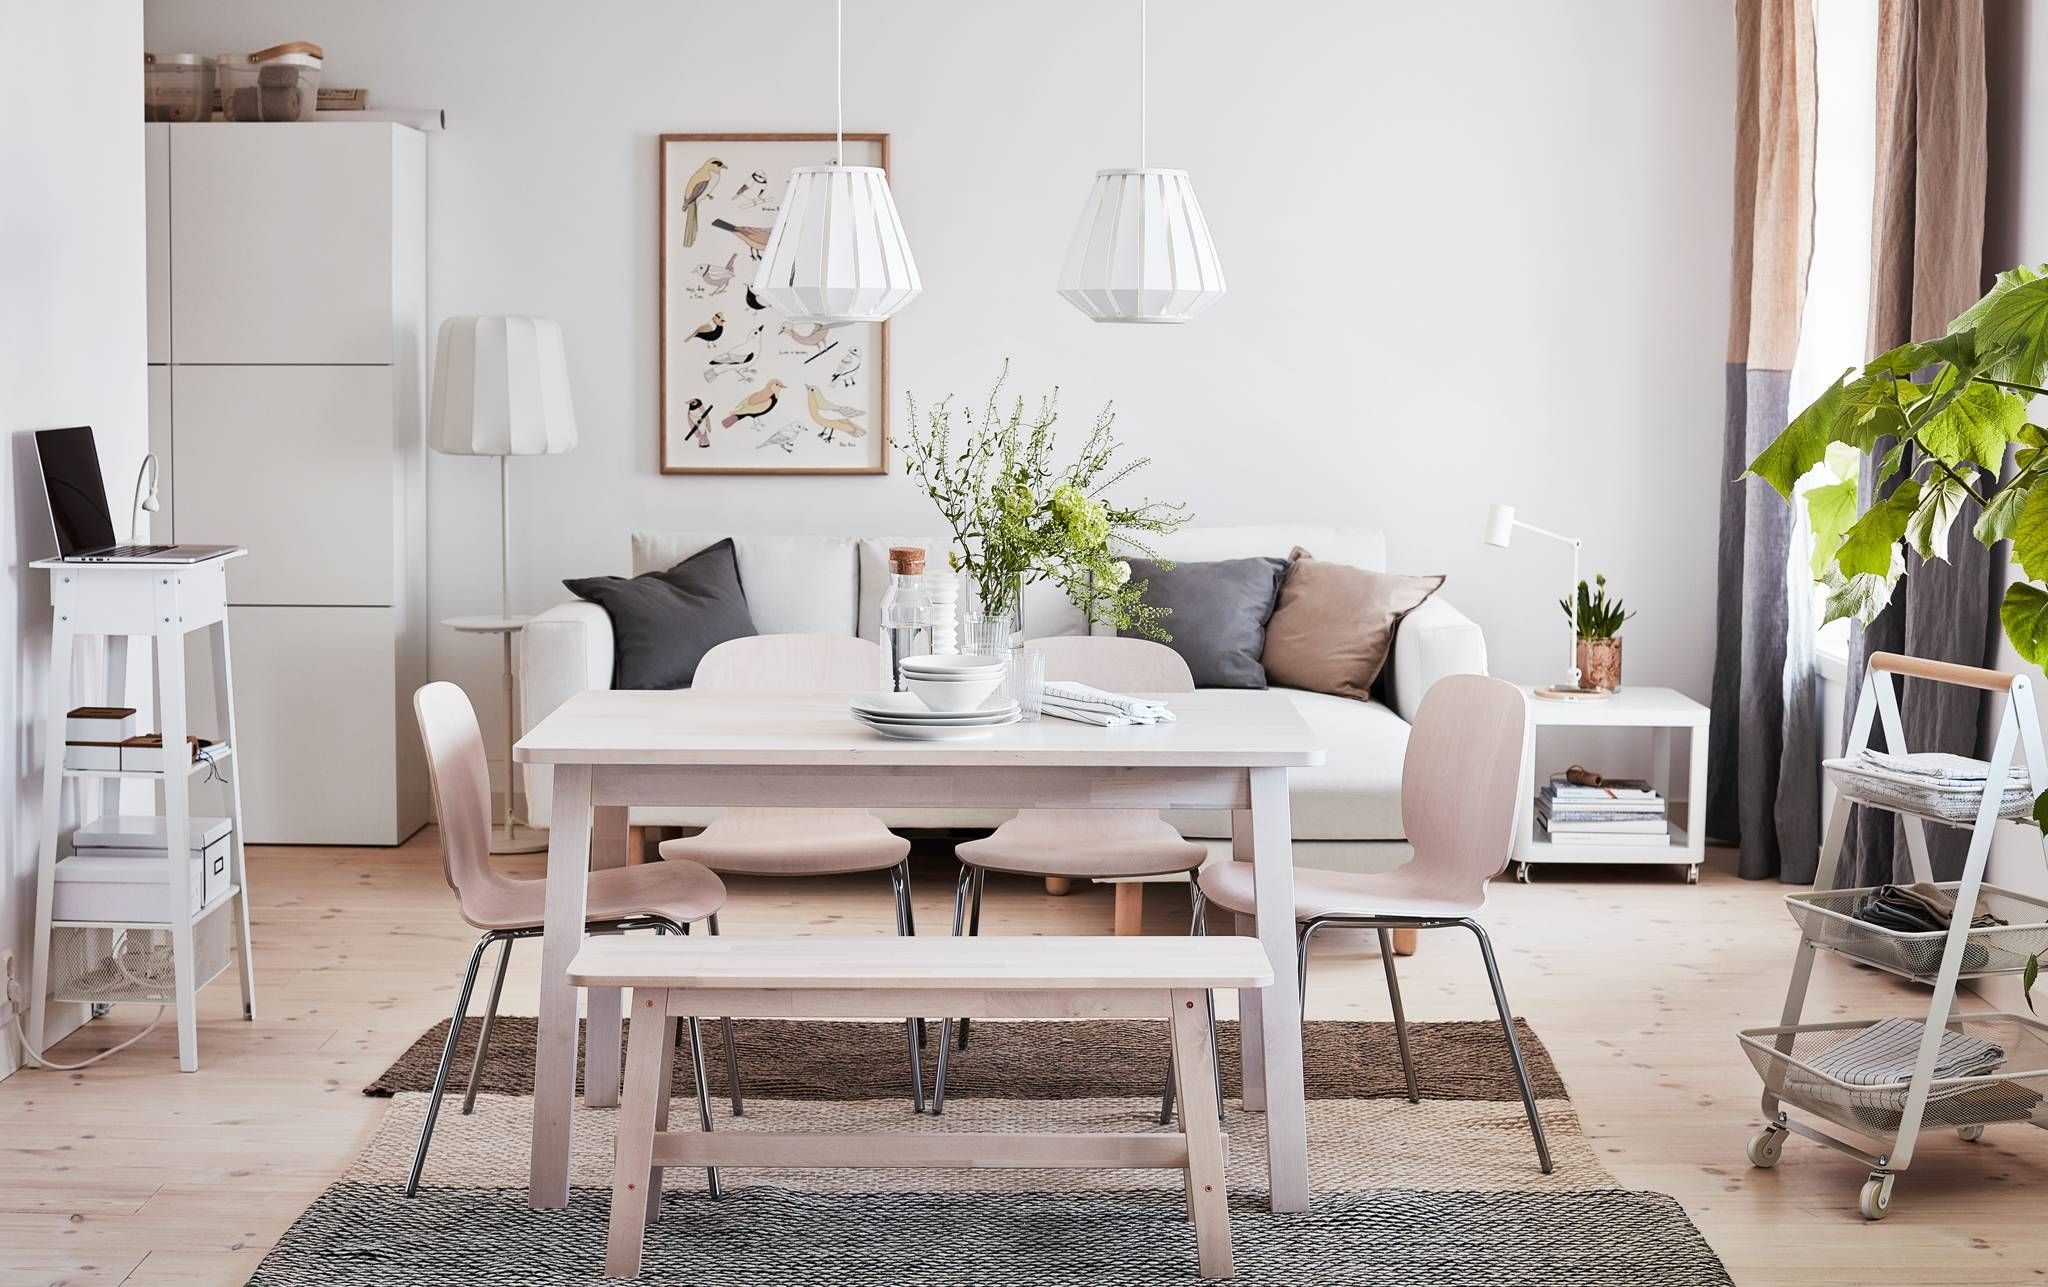 Dining Room Furniture & Ideas | Ikea Intended For Dining Room Bench Sofas (View 2 of 15)